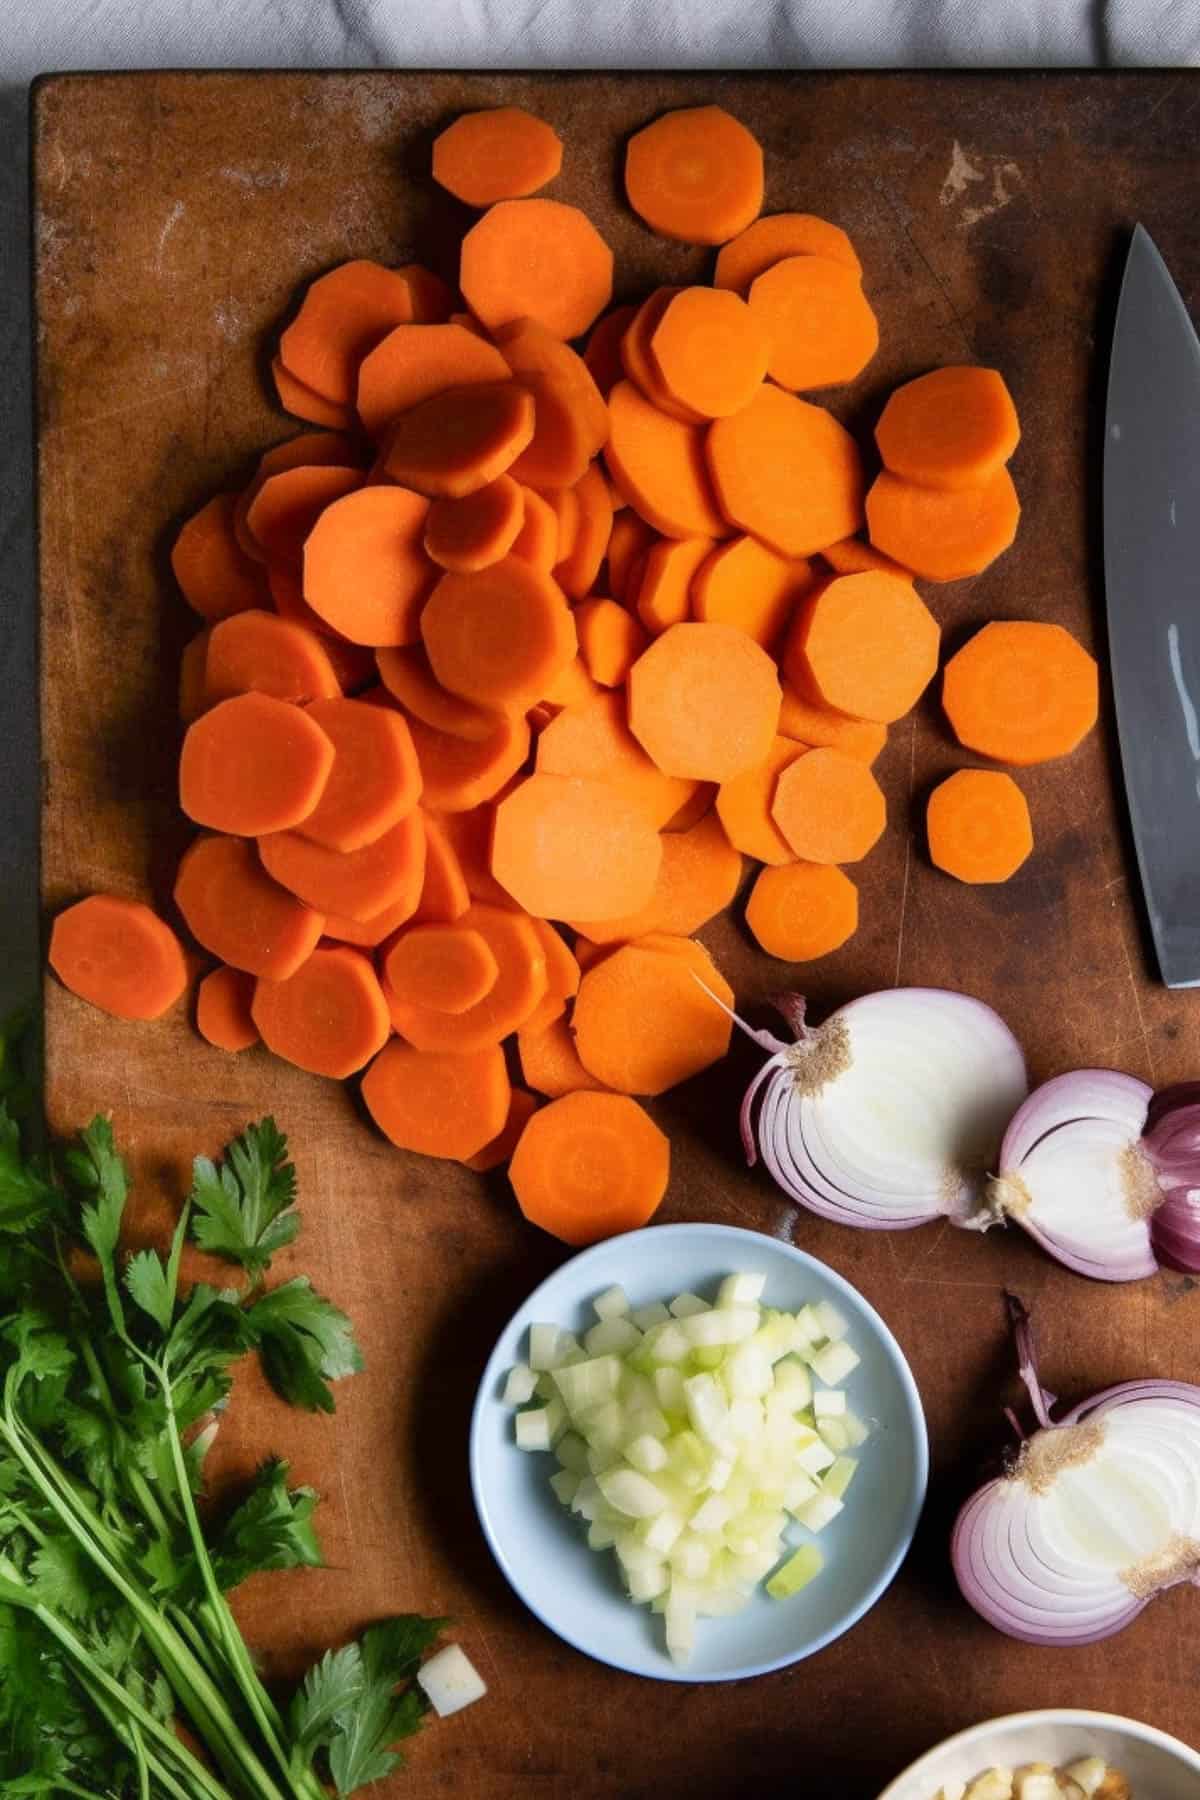 Carrots, onions and garlic on a chopping board to make soup.